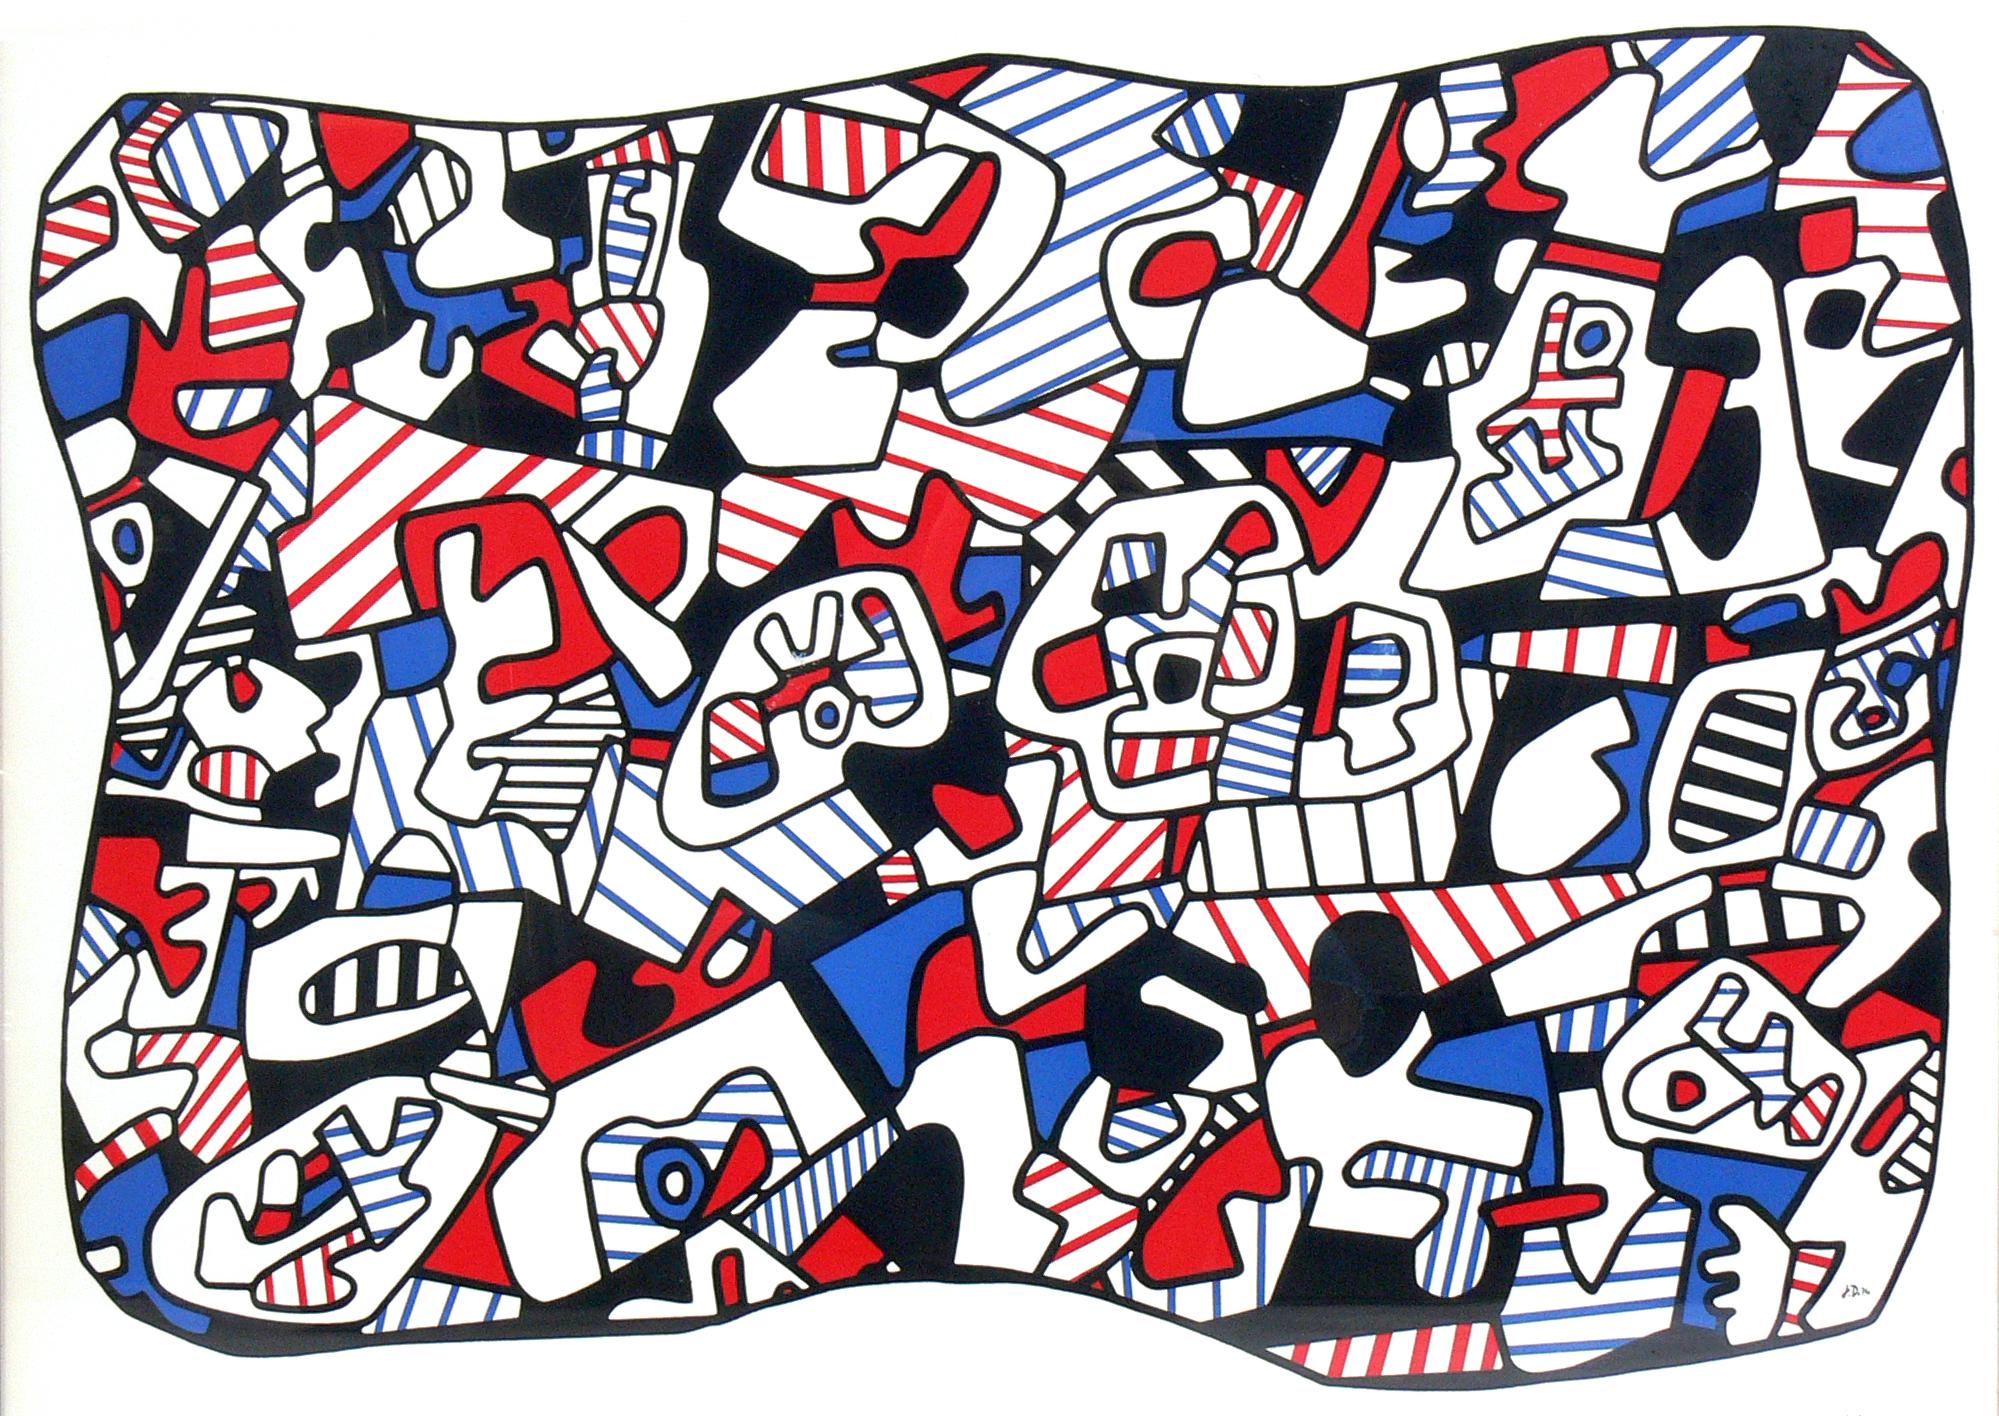 Jean Dubuffet Lithograph, circa 1970s. It has been framed in a clean lined black lacquered wooden gallery frame under UV resistant glass.